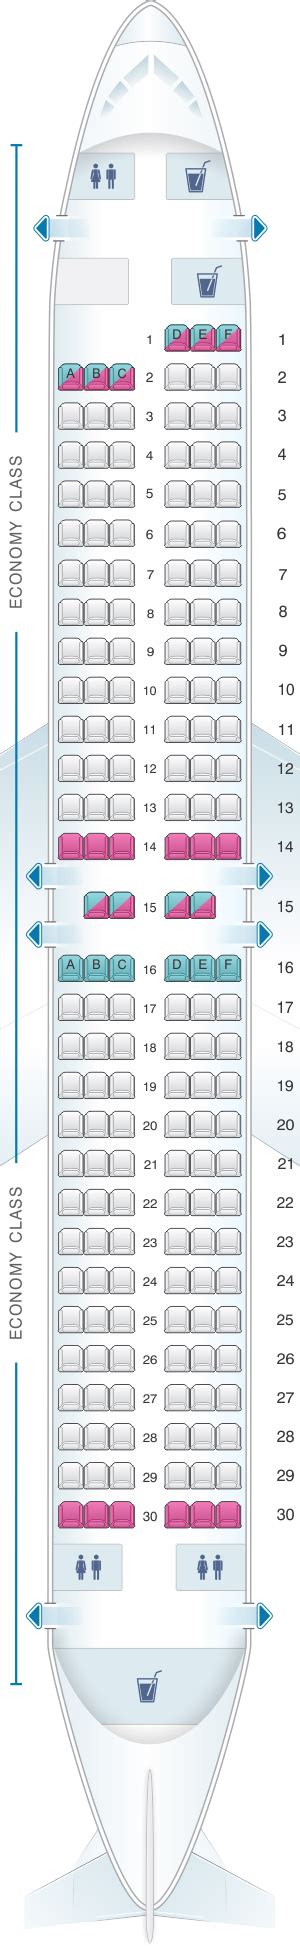 Seat map for southwest airlines. Popular airlines. The ultimate source for airplane seating, in-flight amenities, flights shopping and airline information. 